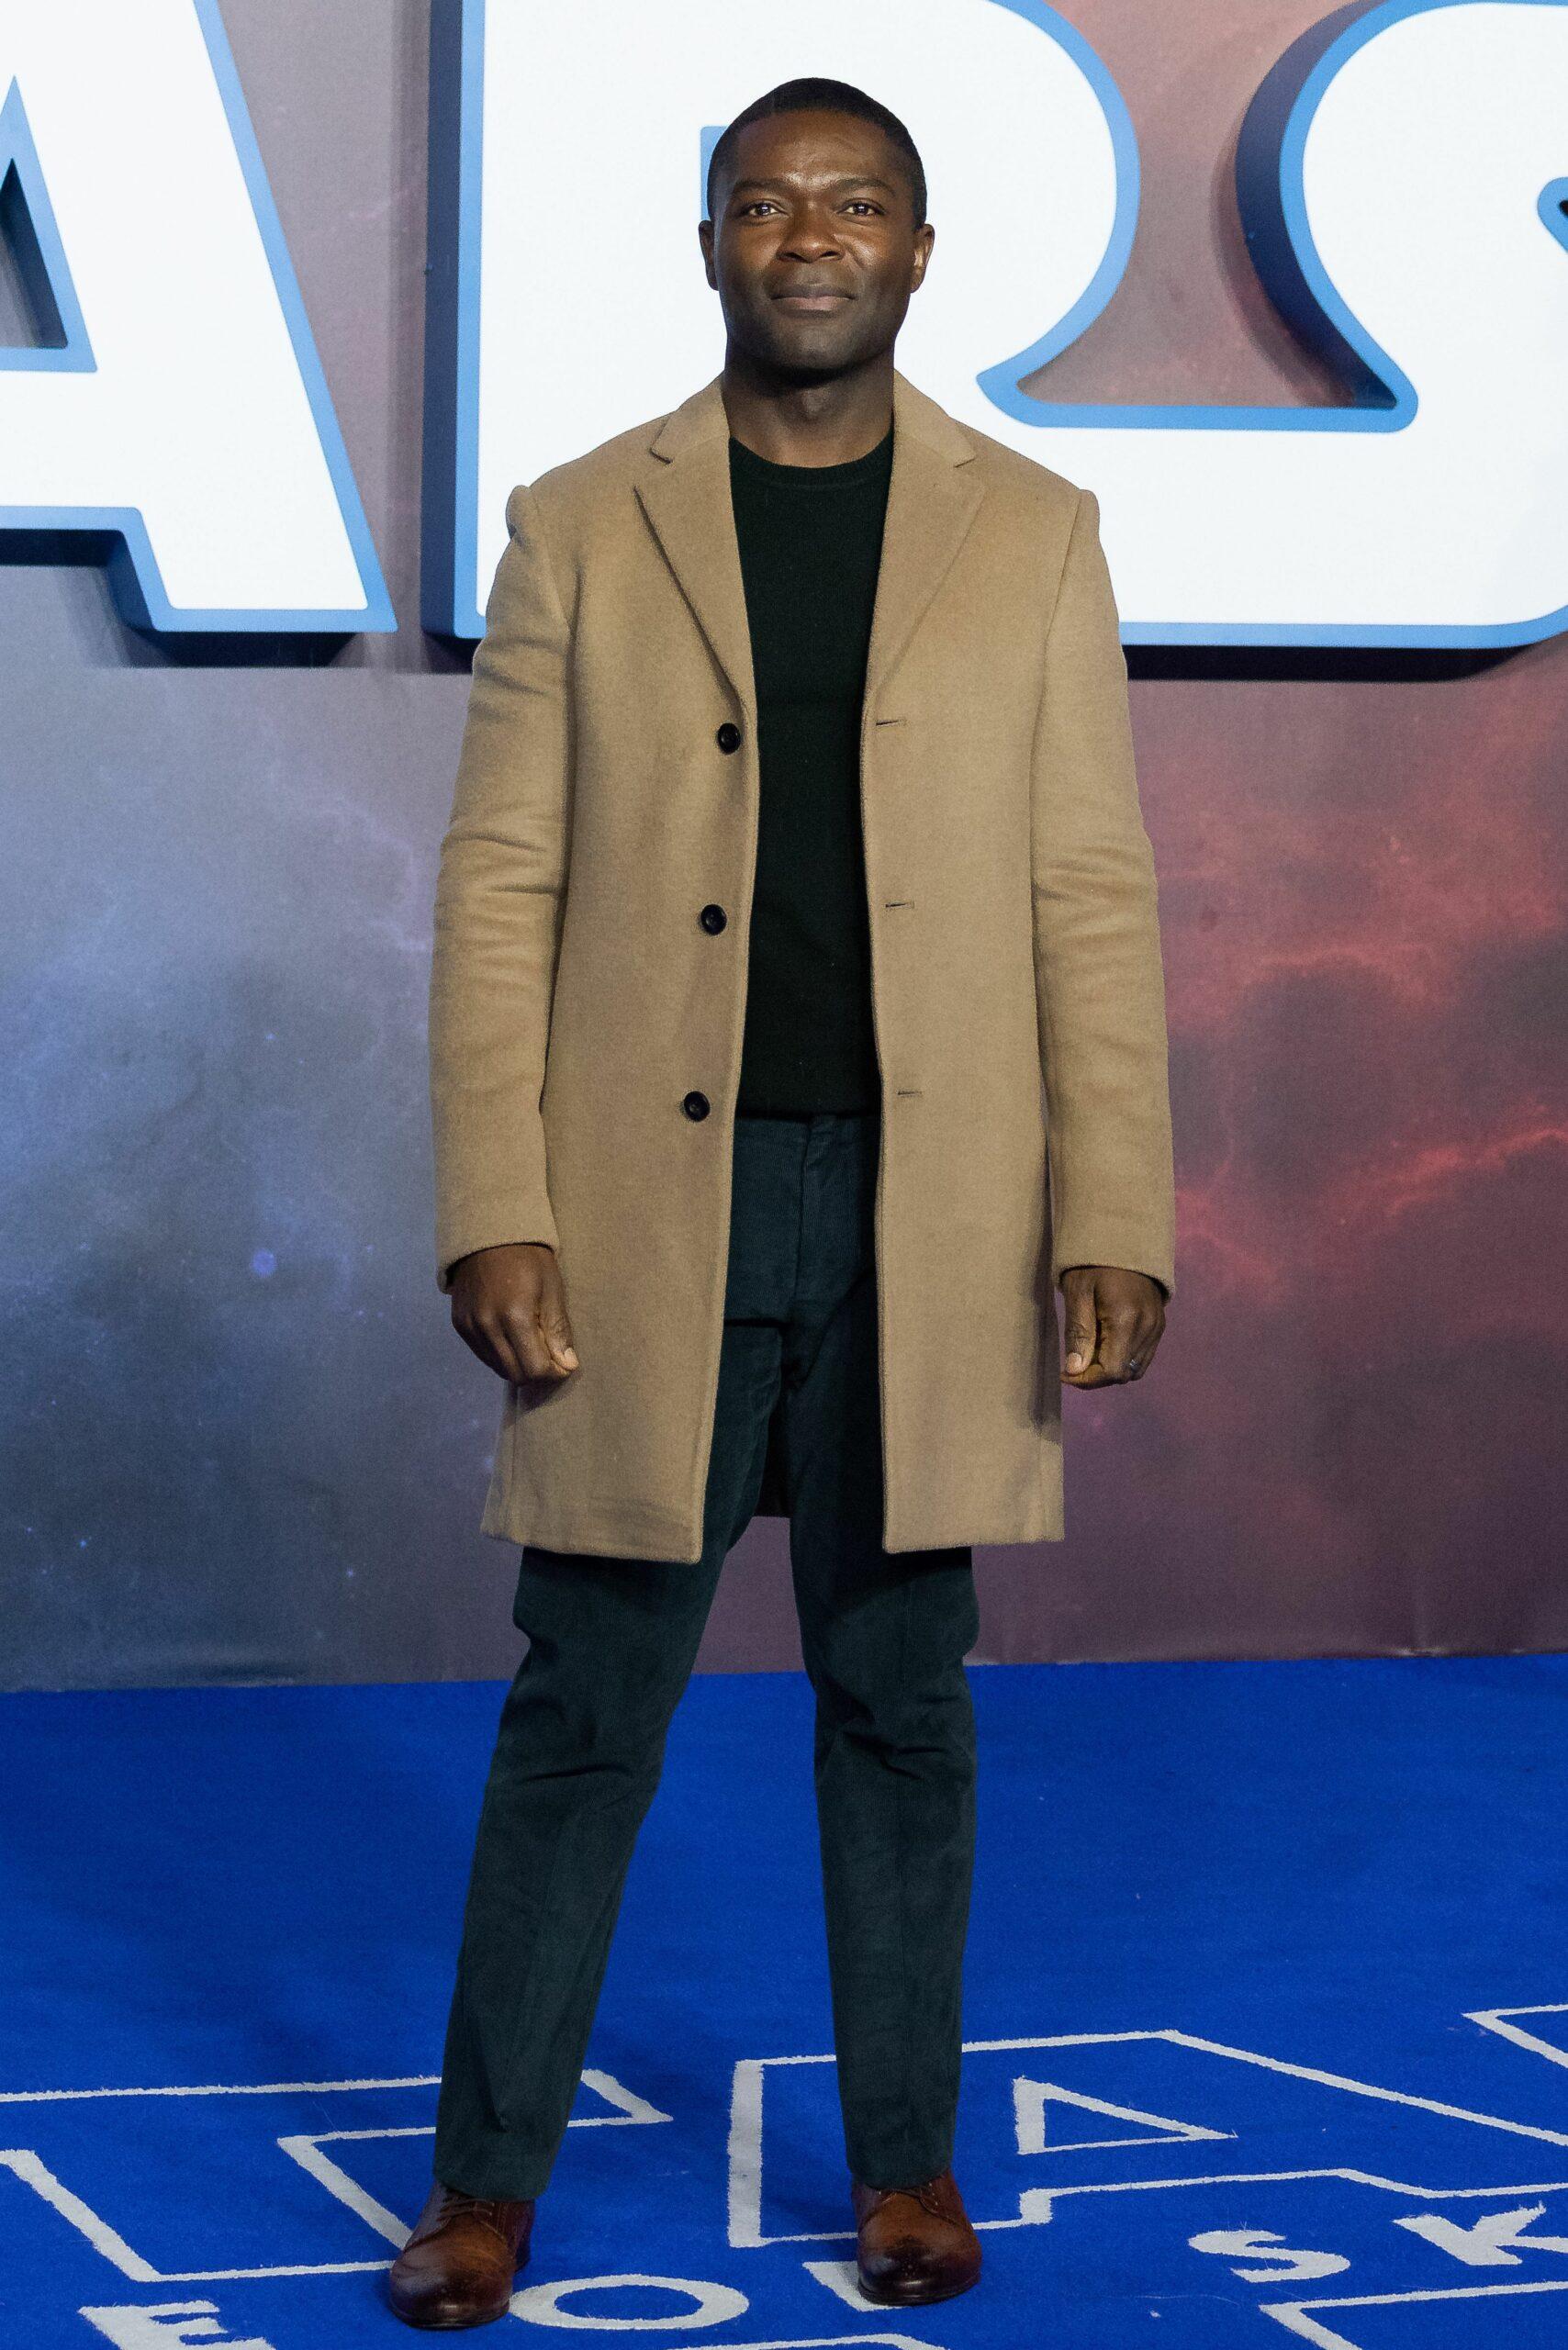 Star Wars The rise of Skywalker European Premiere Leicester Square London UK